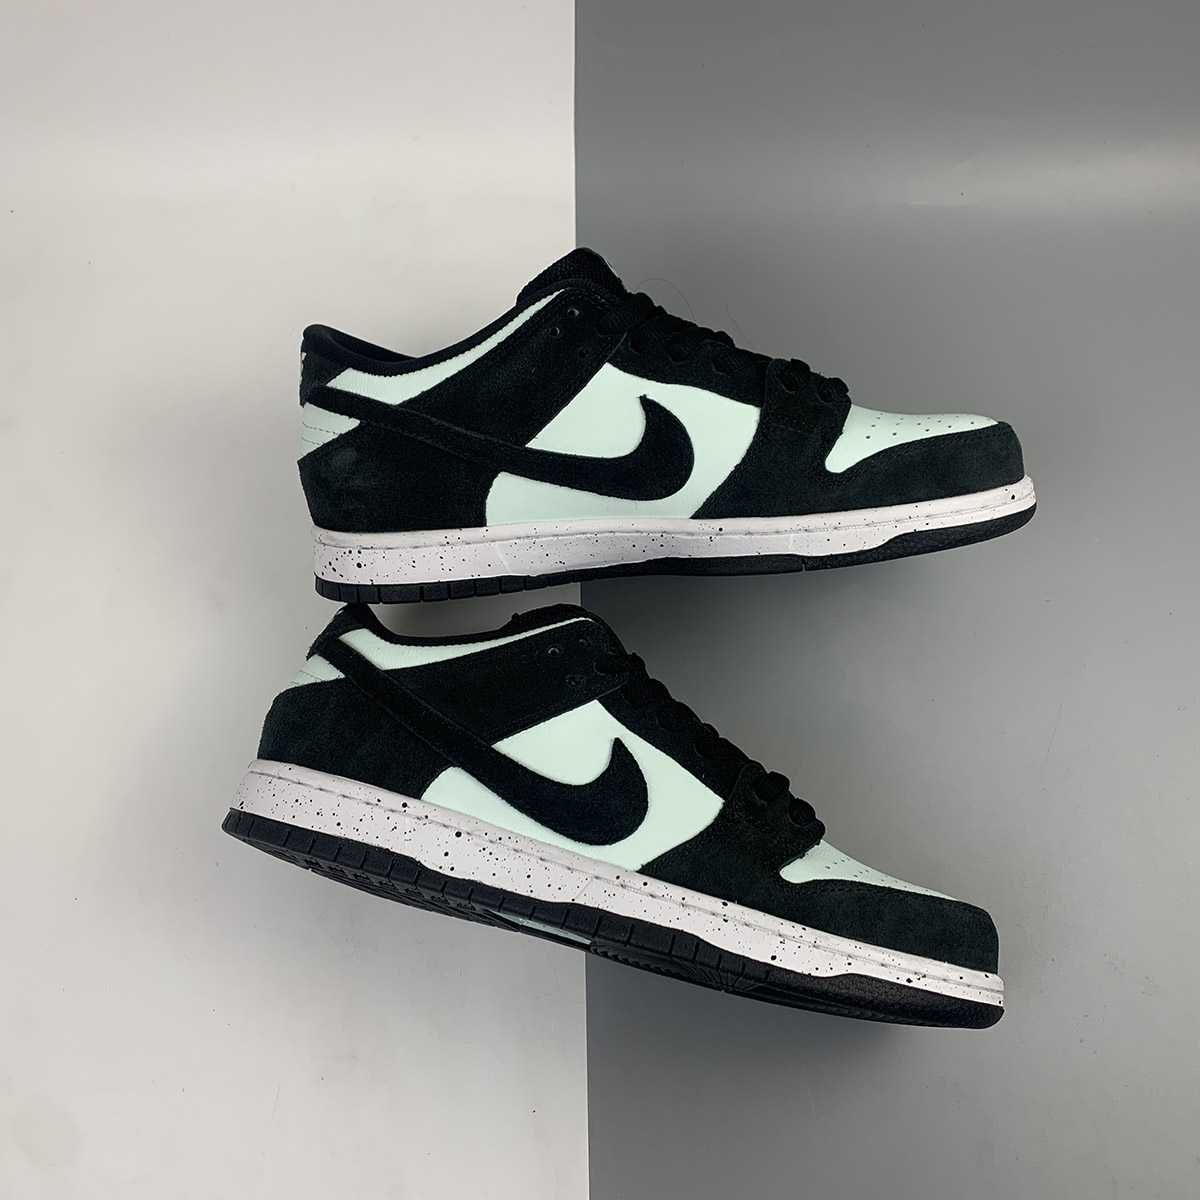 Nike SB Dunk Low Pro Black/Barely Green-White For Sale – The Sole Line